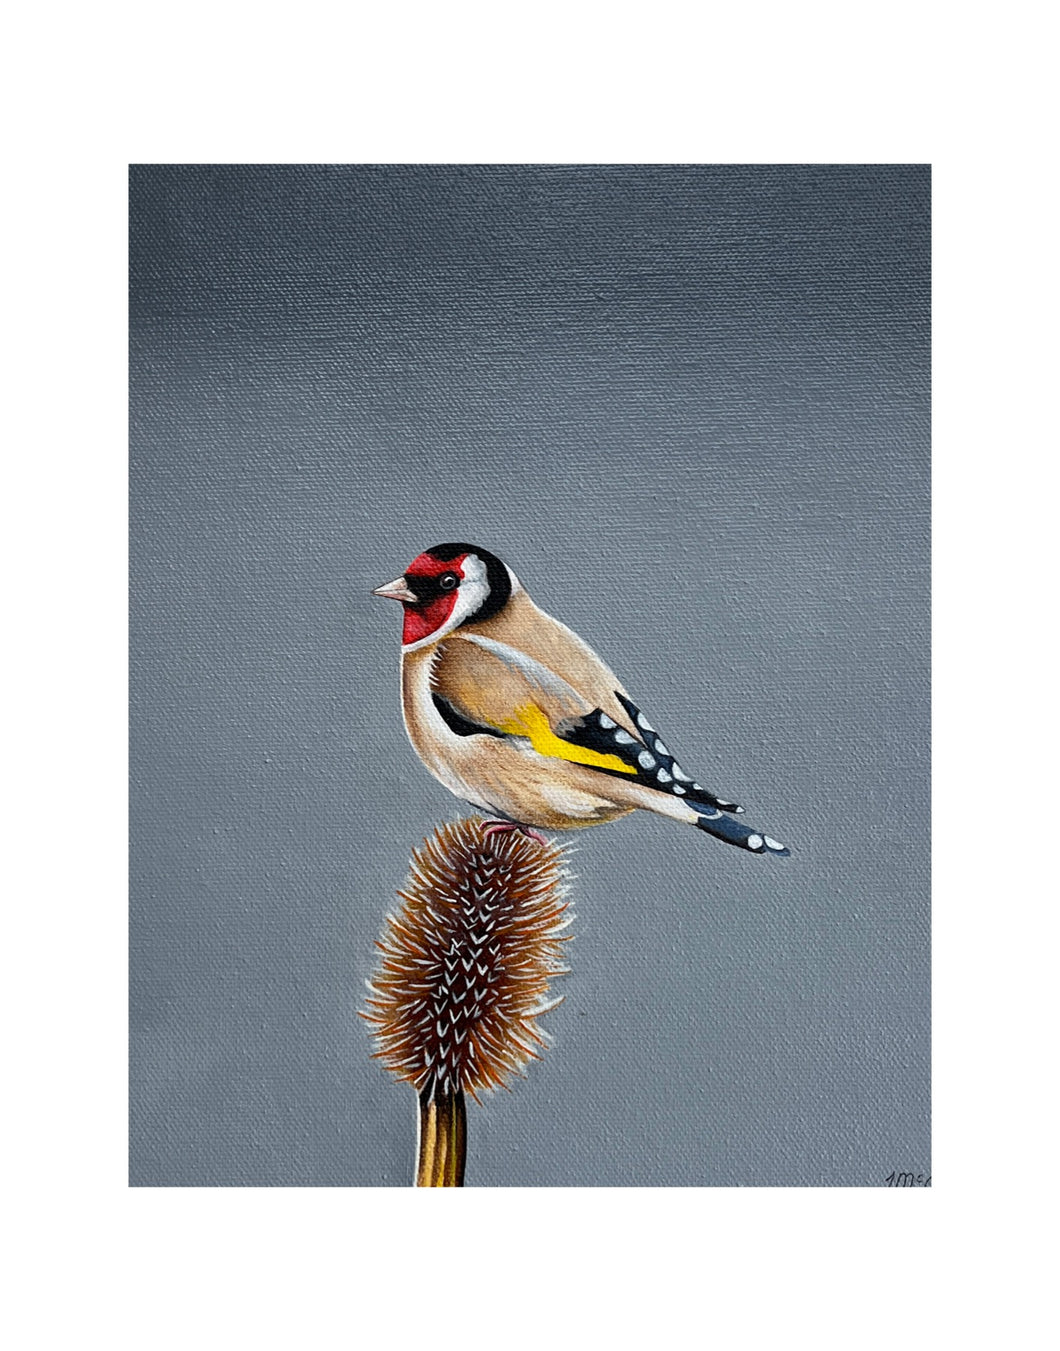 Goldfinch resting on a teasel